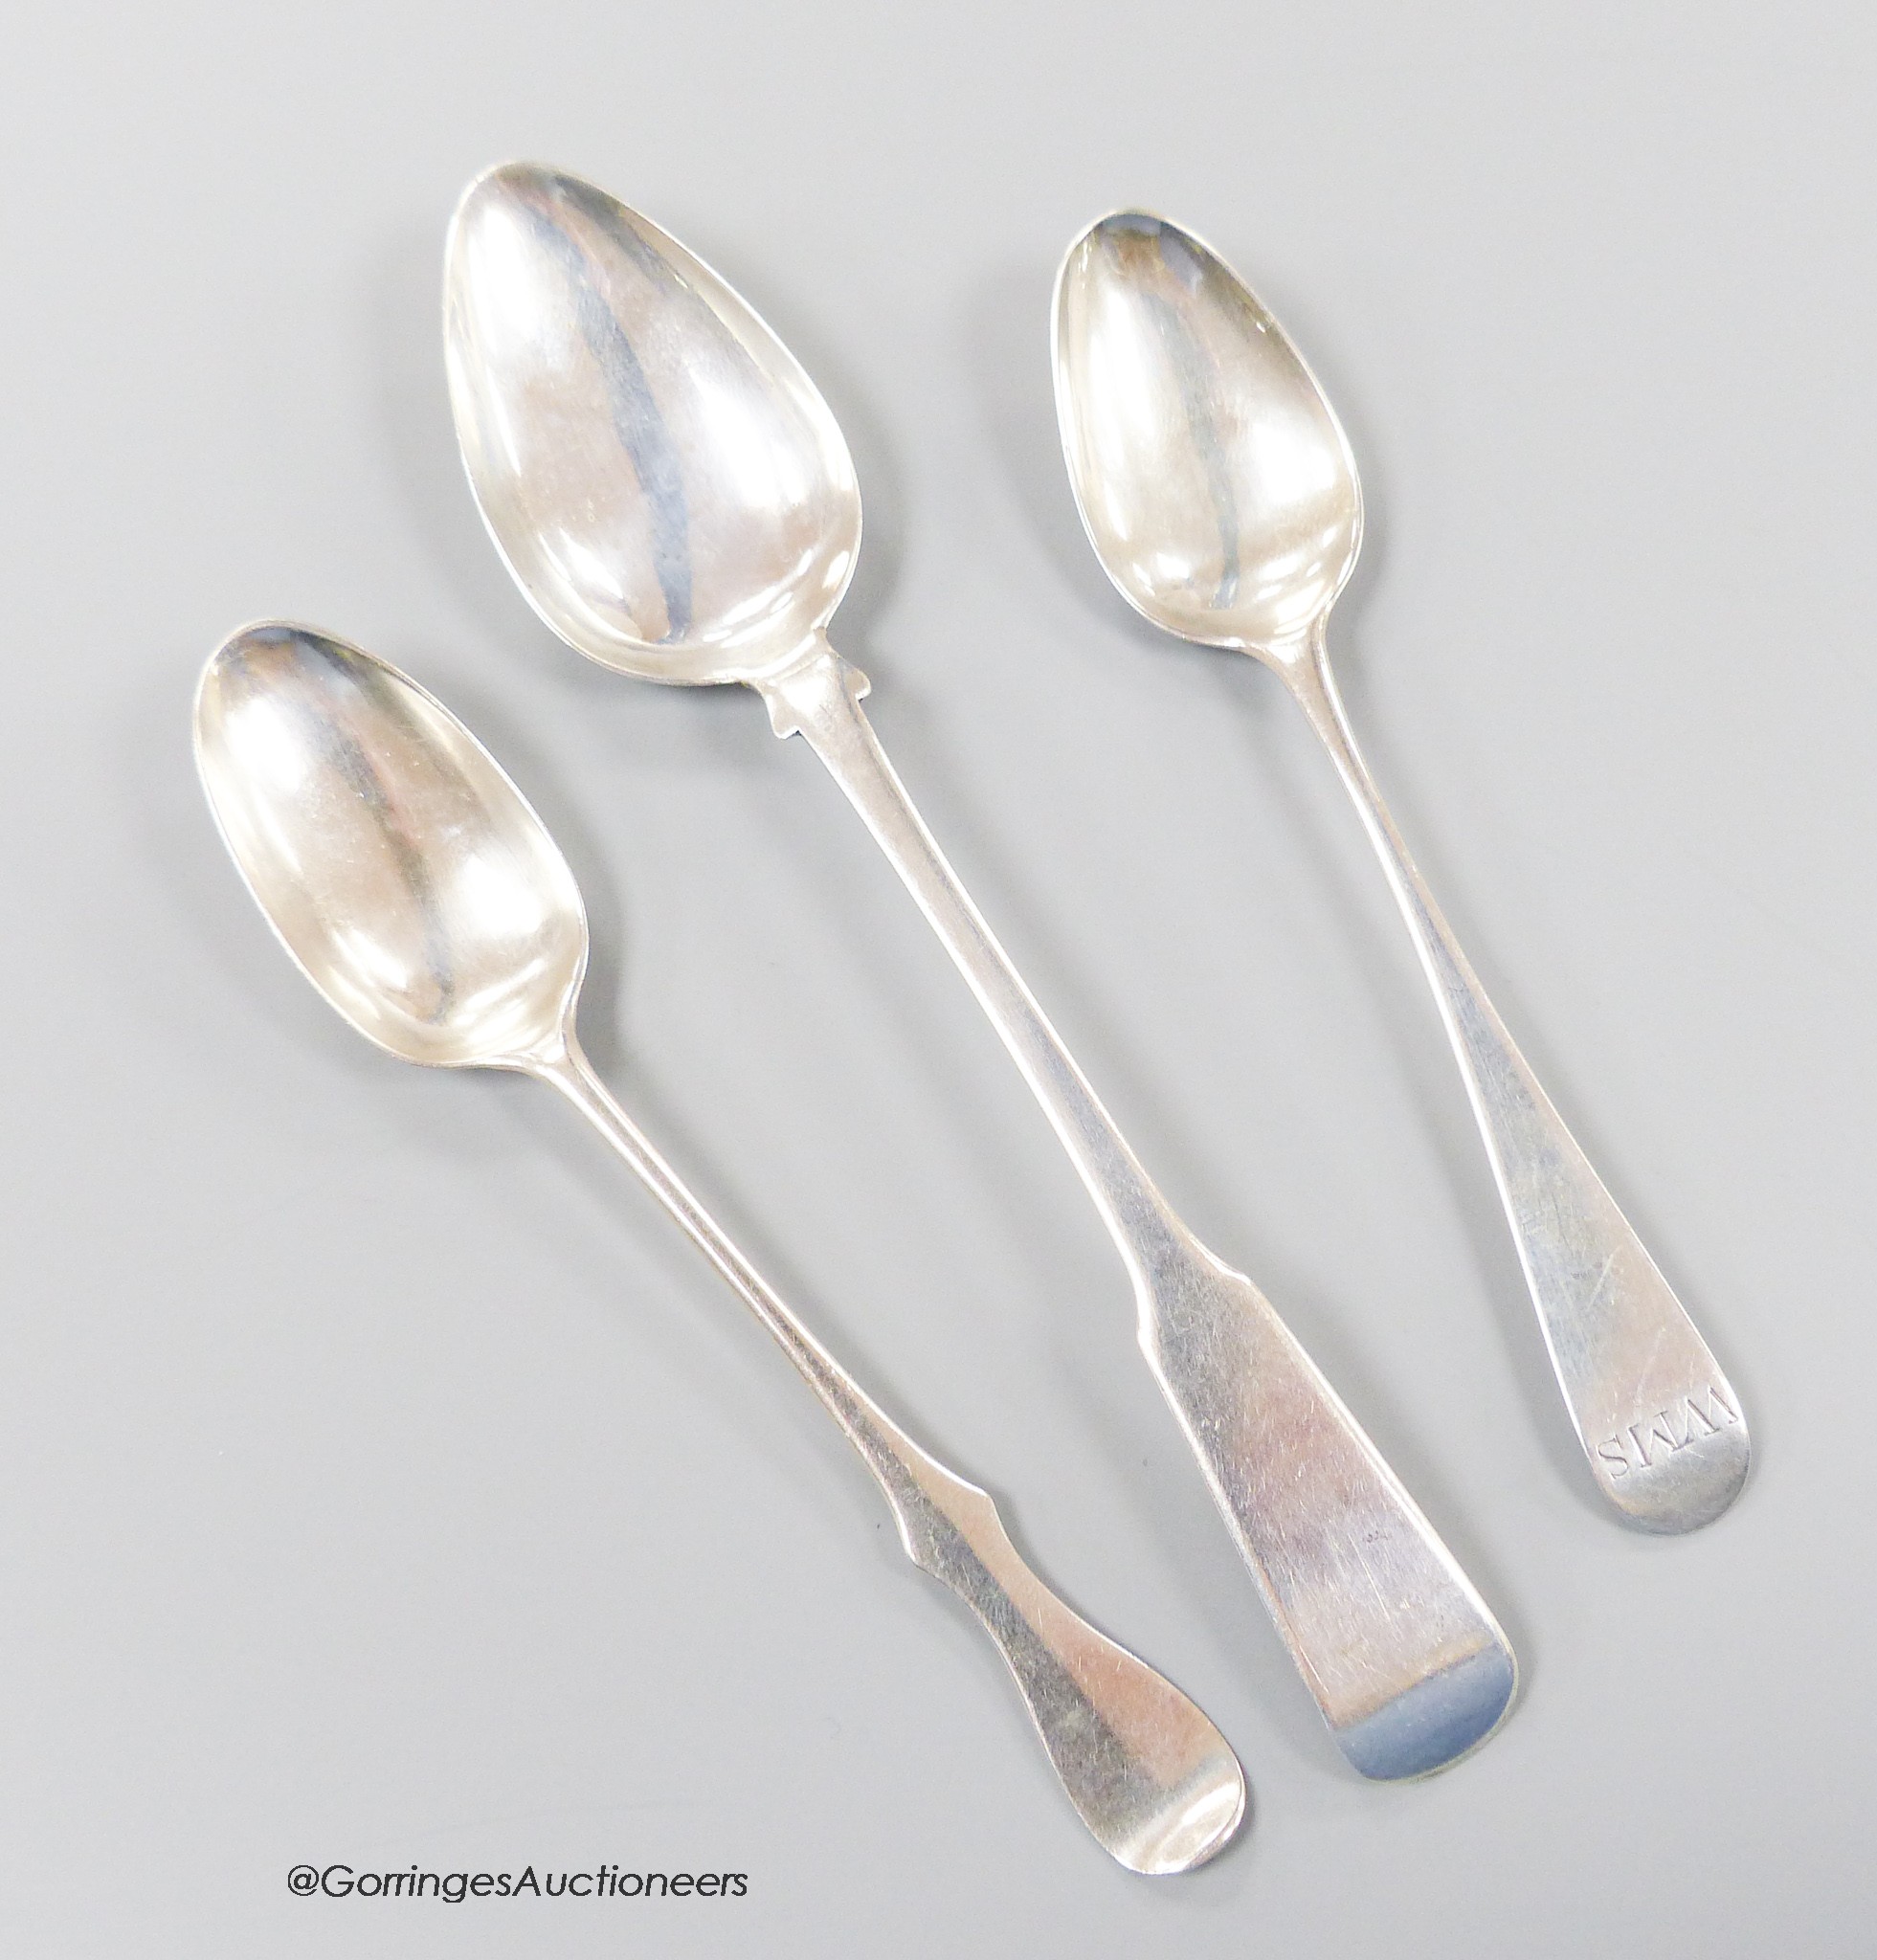 A19th century Scottish provincial silver fiddle pattern teaspoon, Robert Robertson, Cupar, c.1840, 15.1cm and two other smaller teaspoons, Nathaniel Gillert, Aberdeen, c.1800 and William Taylor, Edinburgh, c. 1770, gross